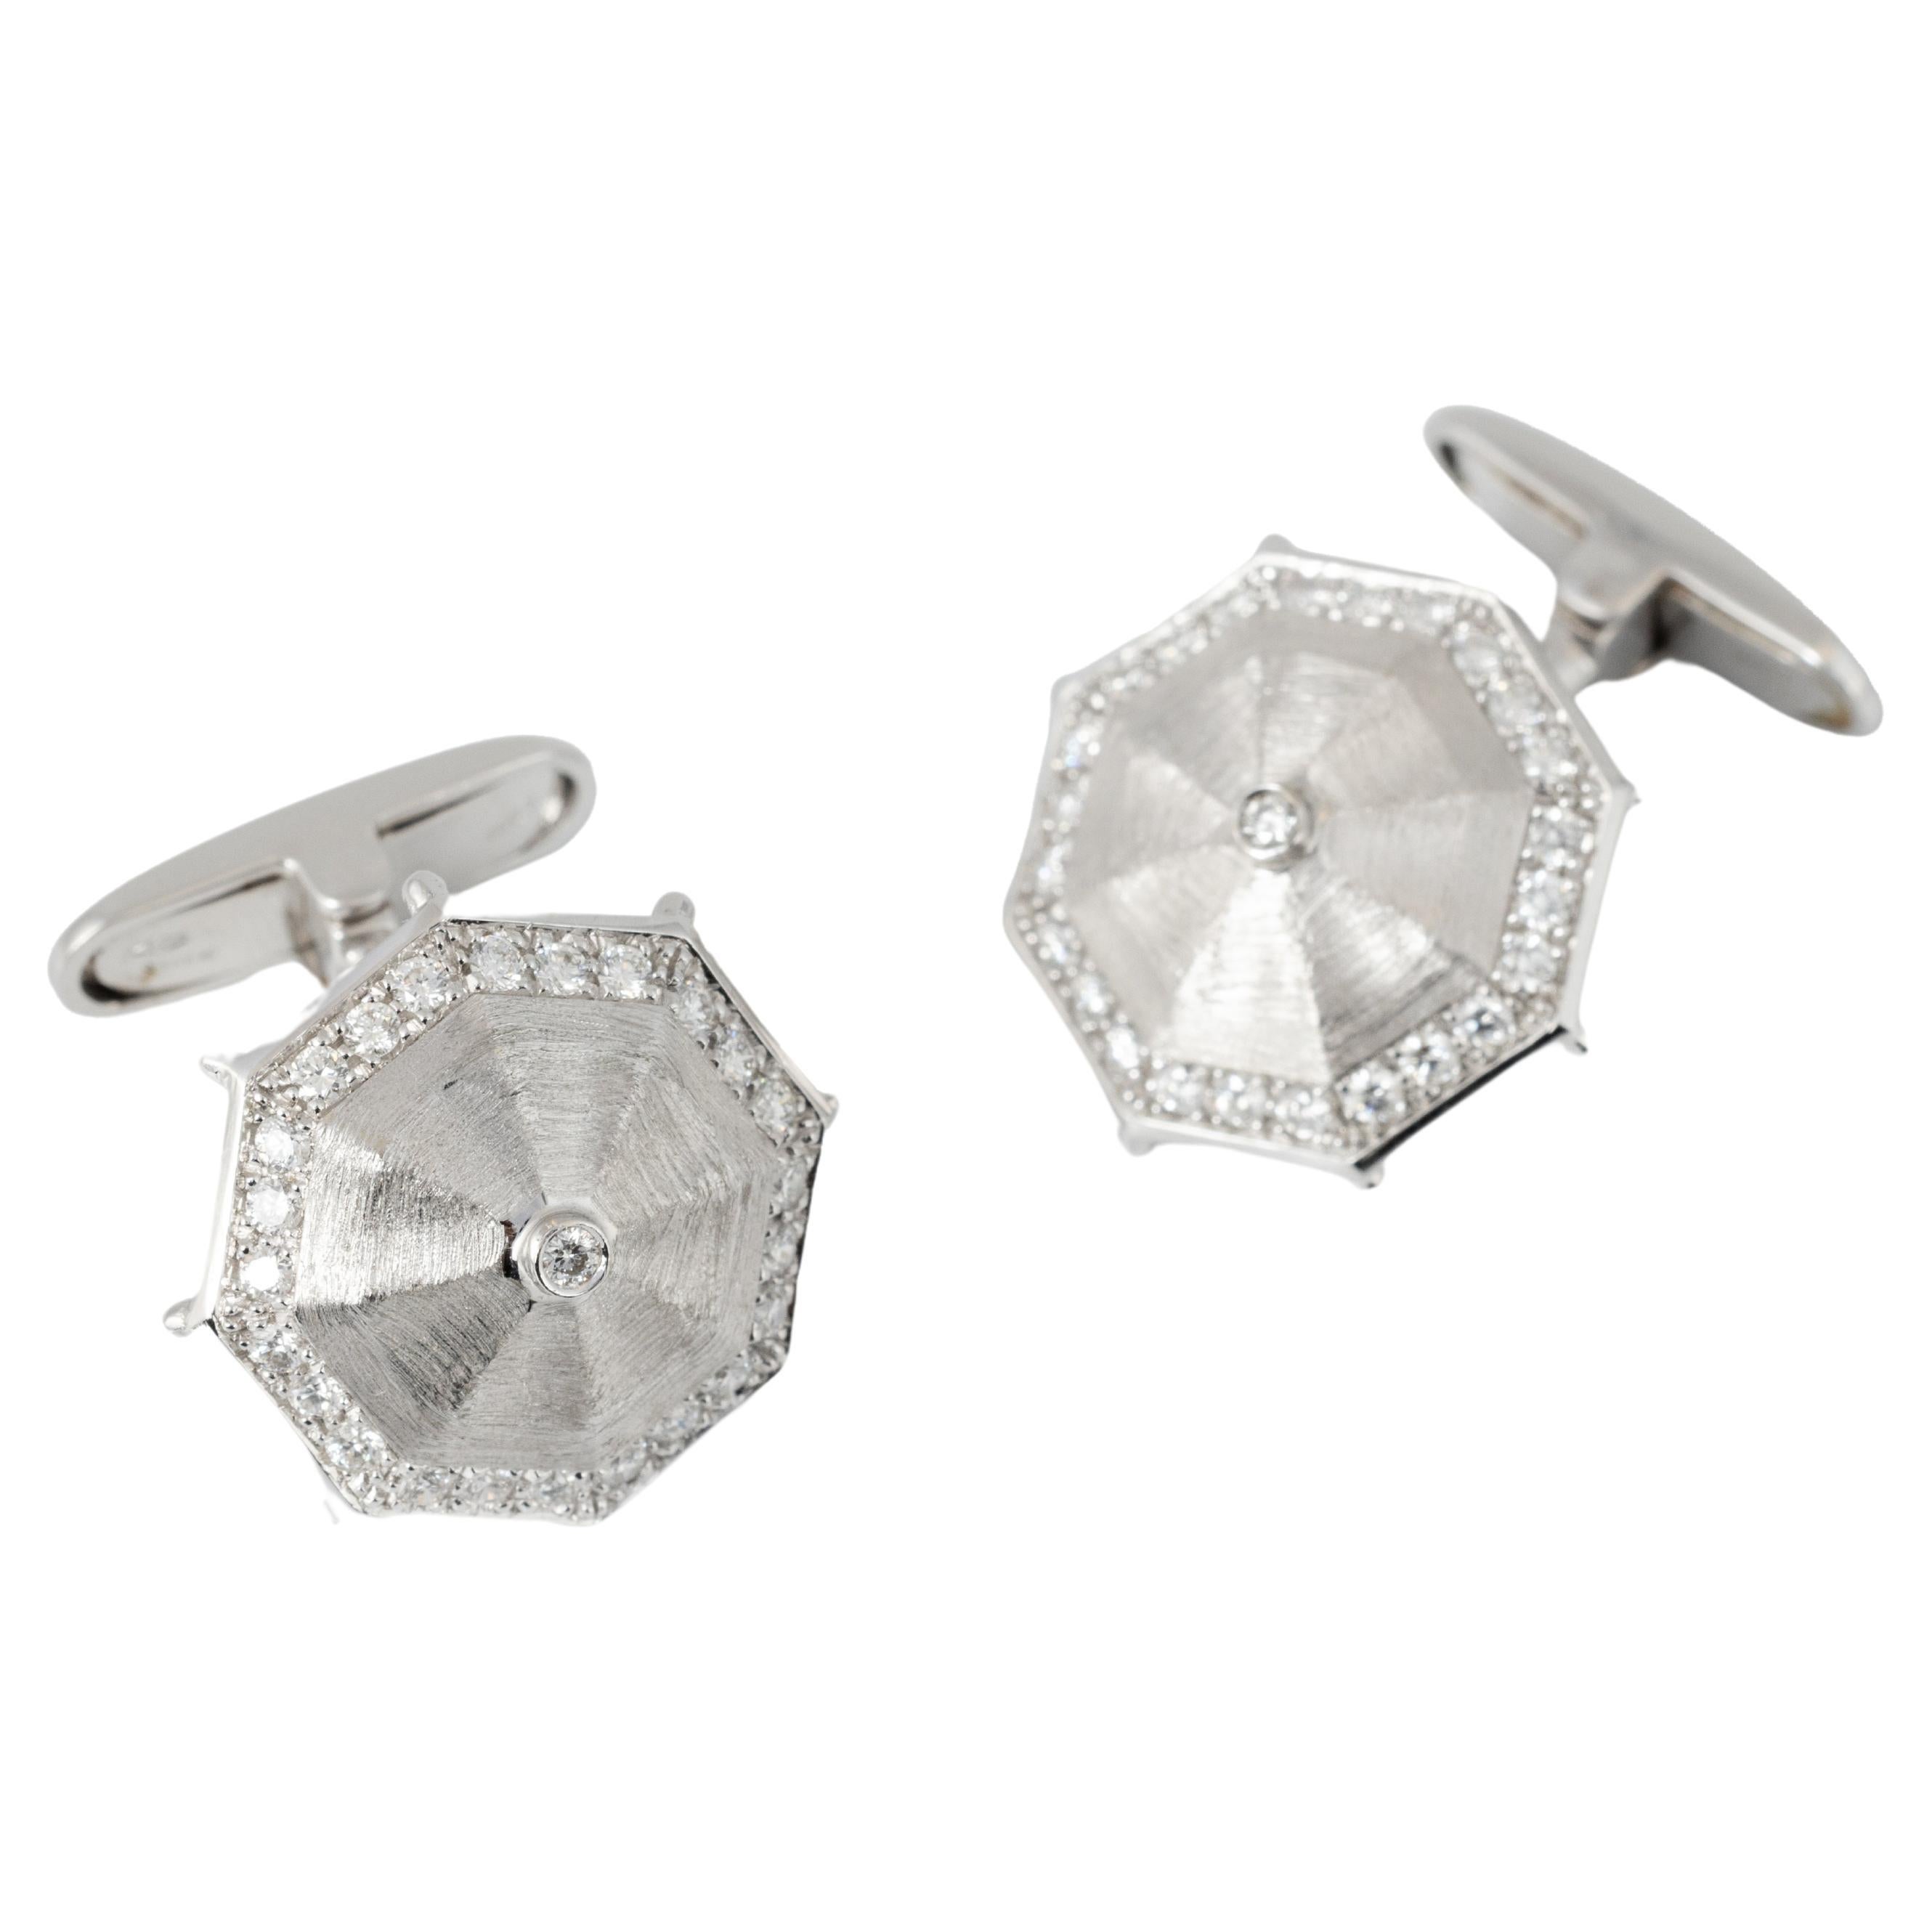 "Costis" Umbrella Collection Cufflinks WG with 0.73 carats Diamonds on the rim